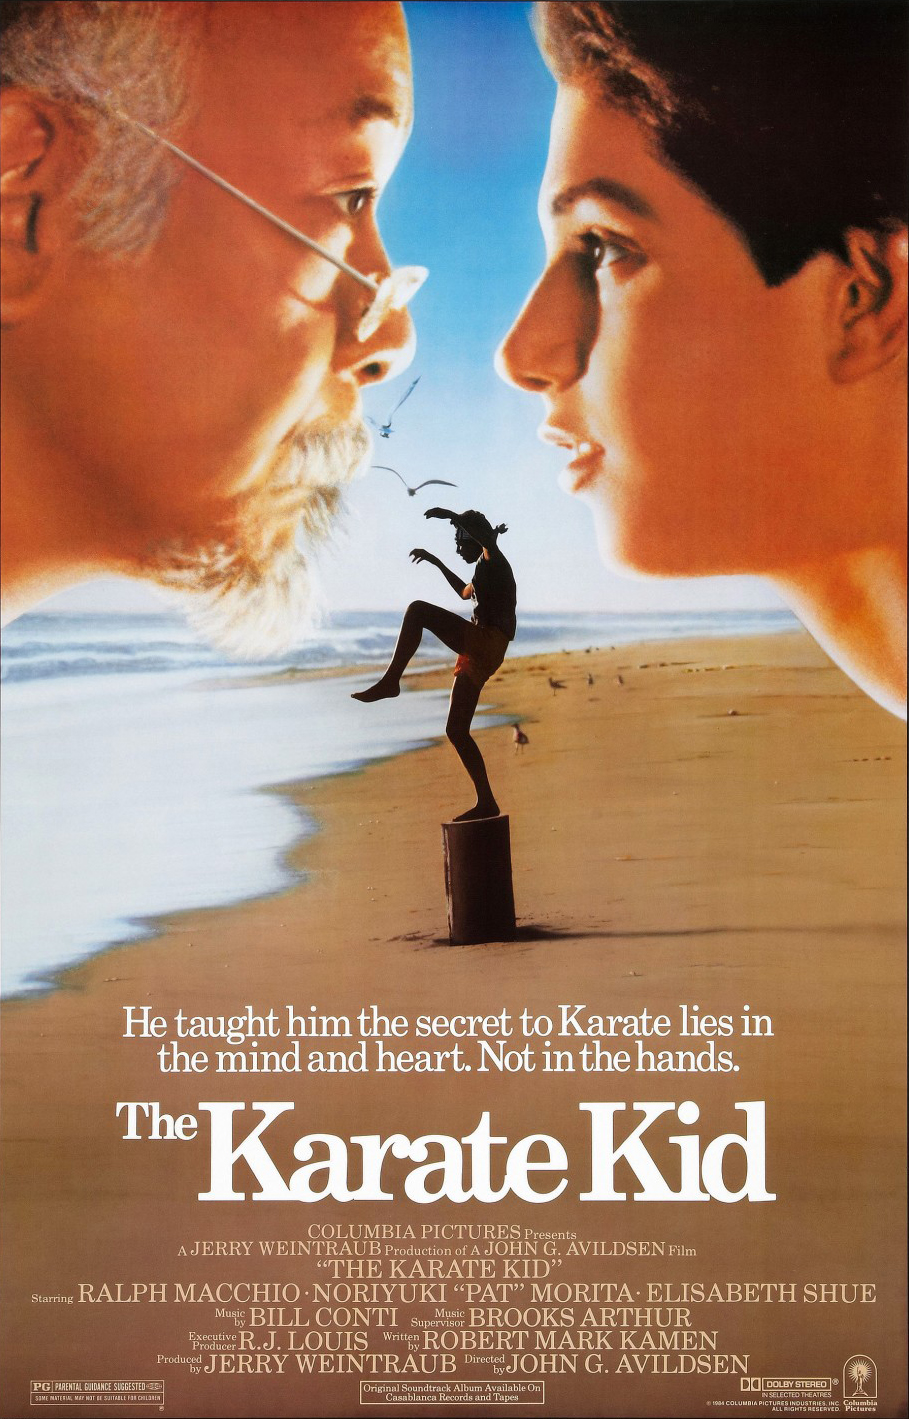 The Karate Kid| Movies About & Relating To Sports | SPMA Shelf